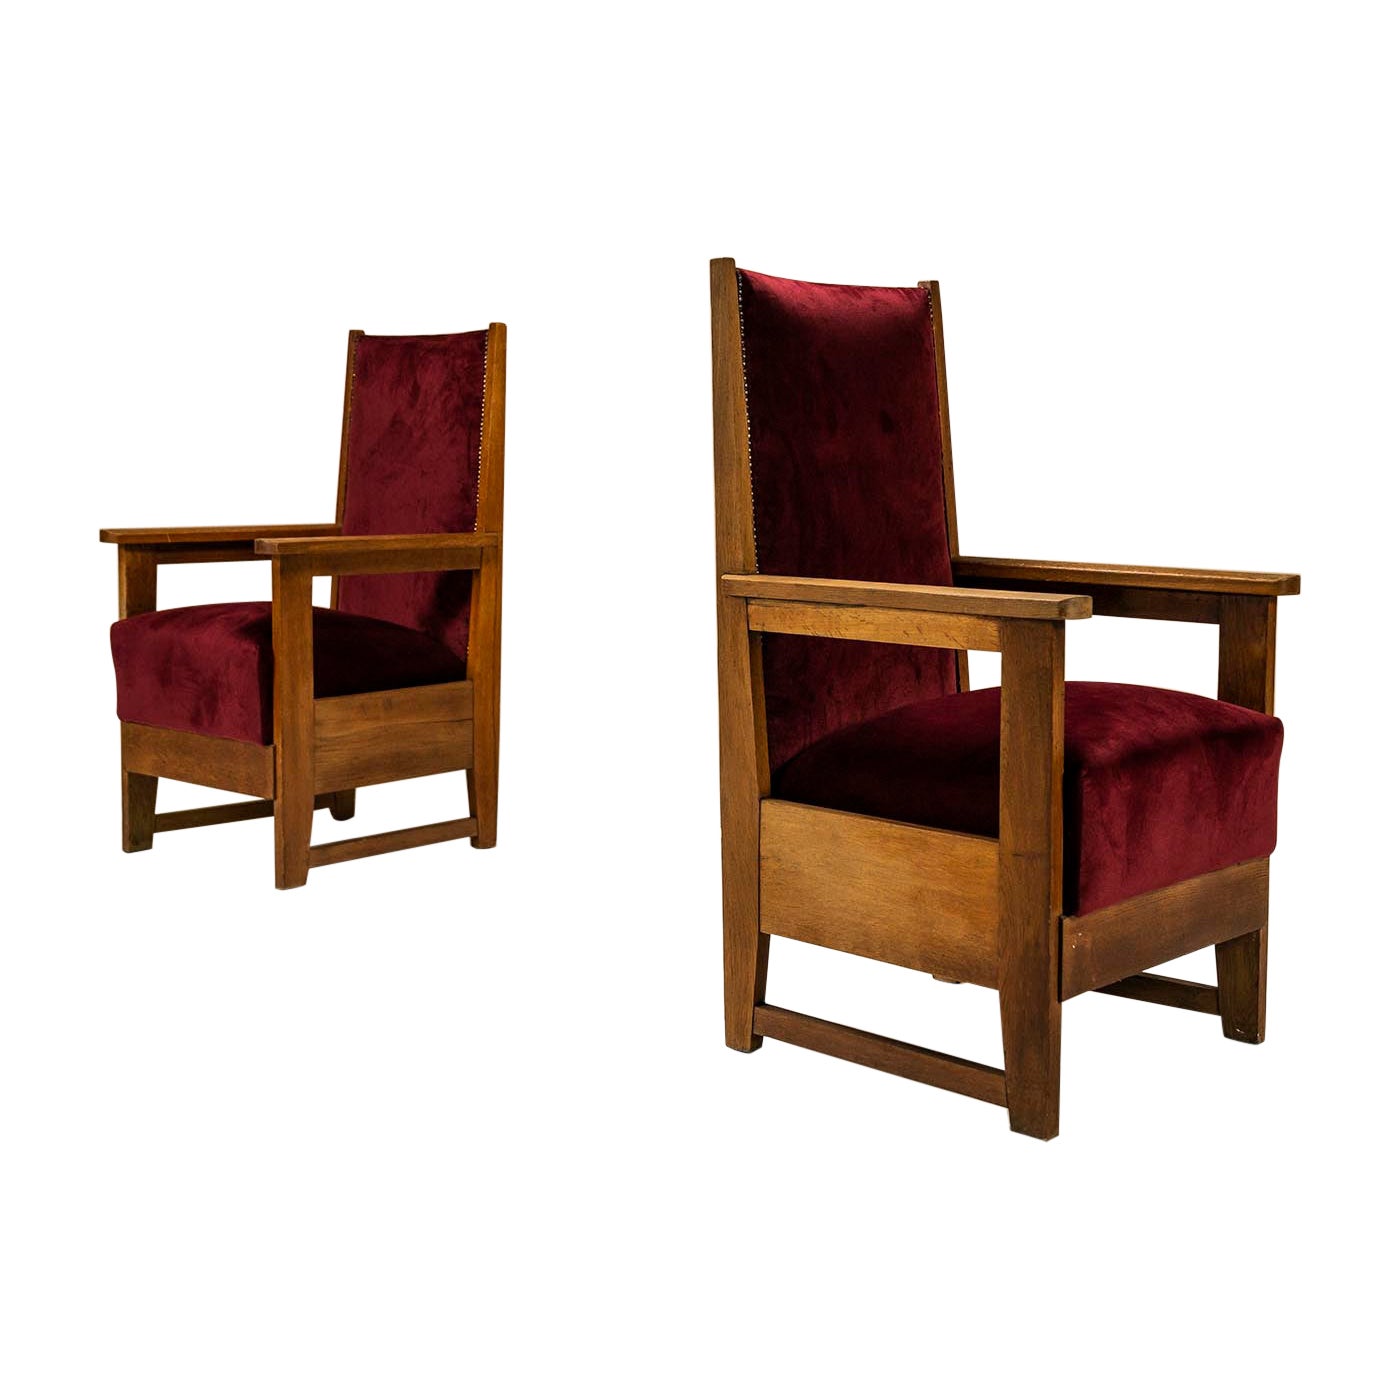 Two Amsterdam School High Back Chairs in Oak and Burgundy, Netherlands 1930s For Sale